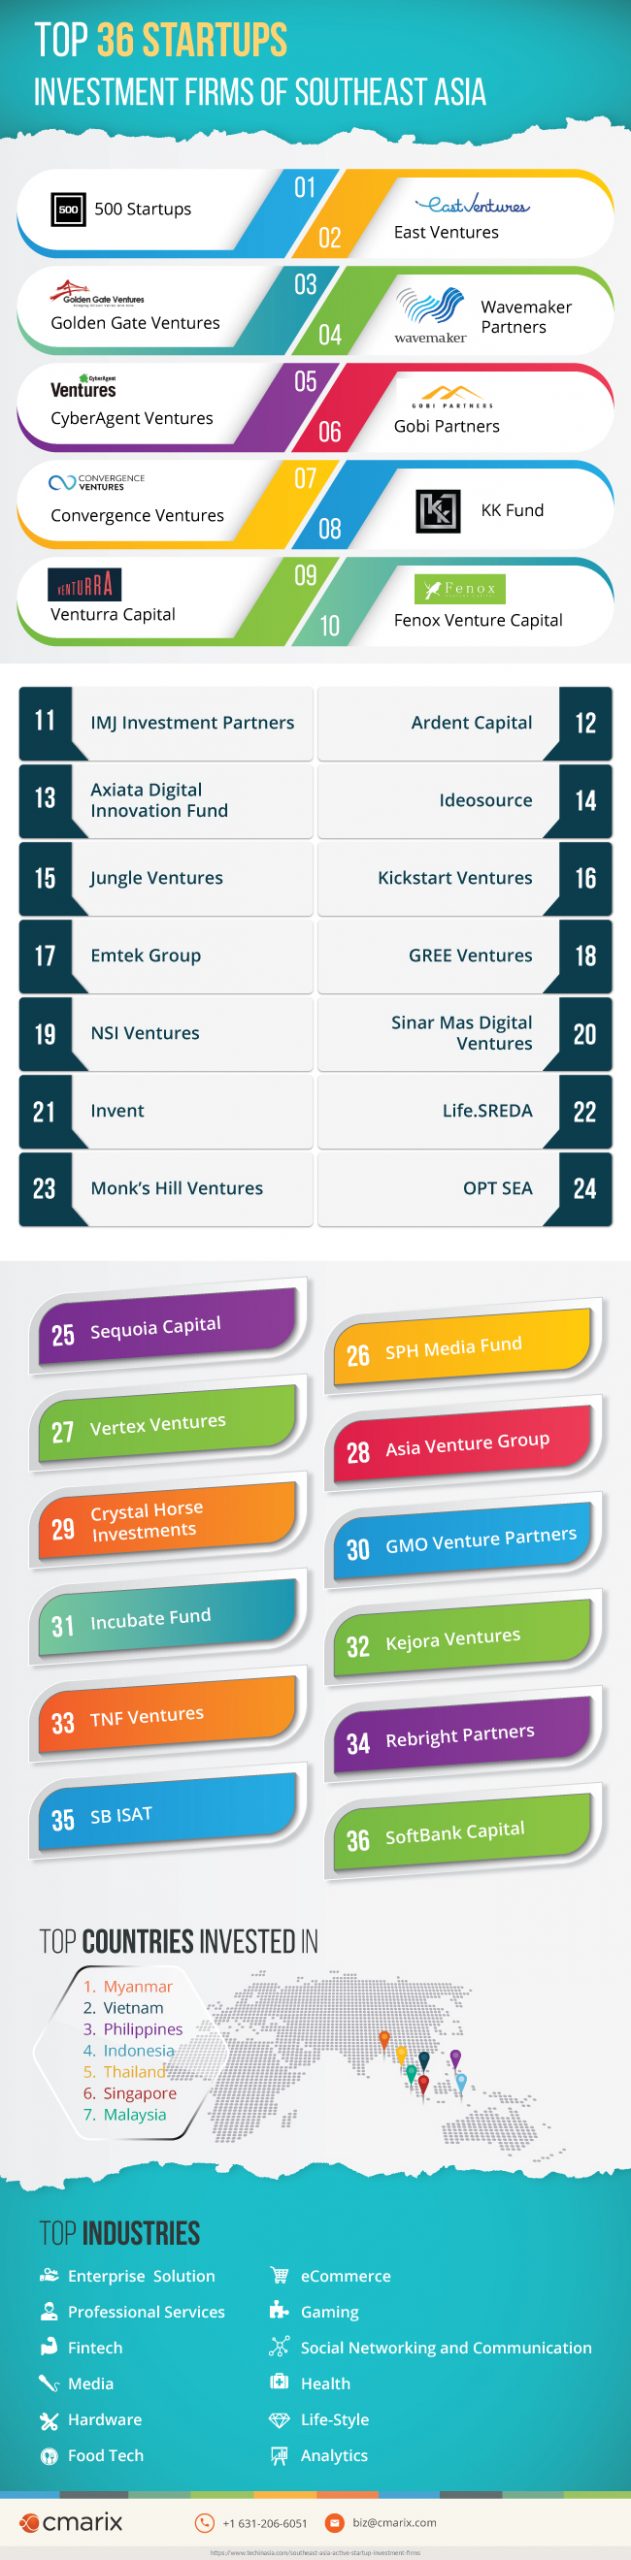 Top 36 Startup investment firms of Southeast Asia